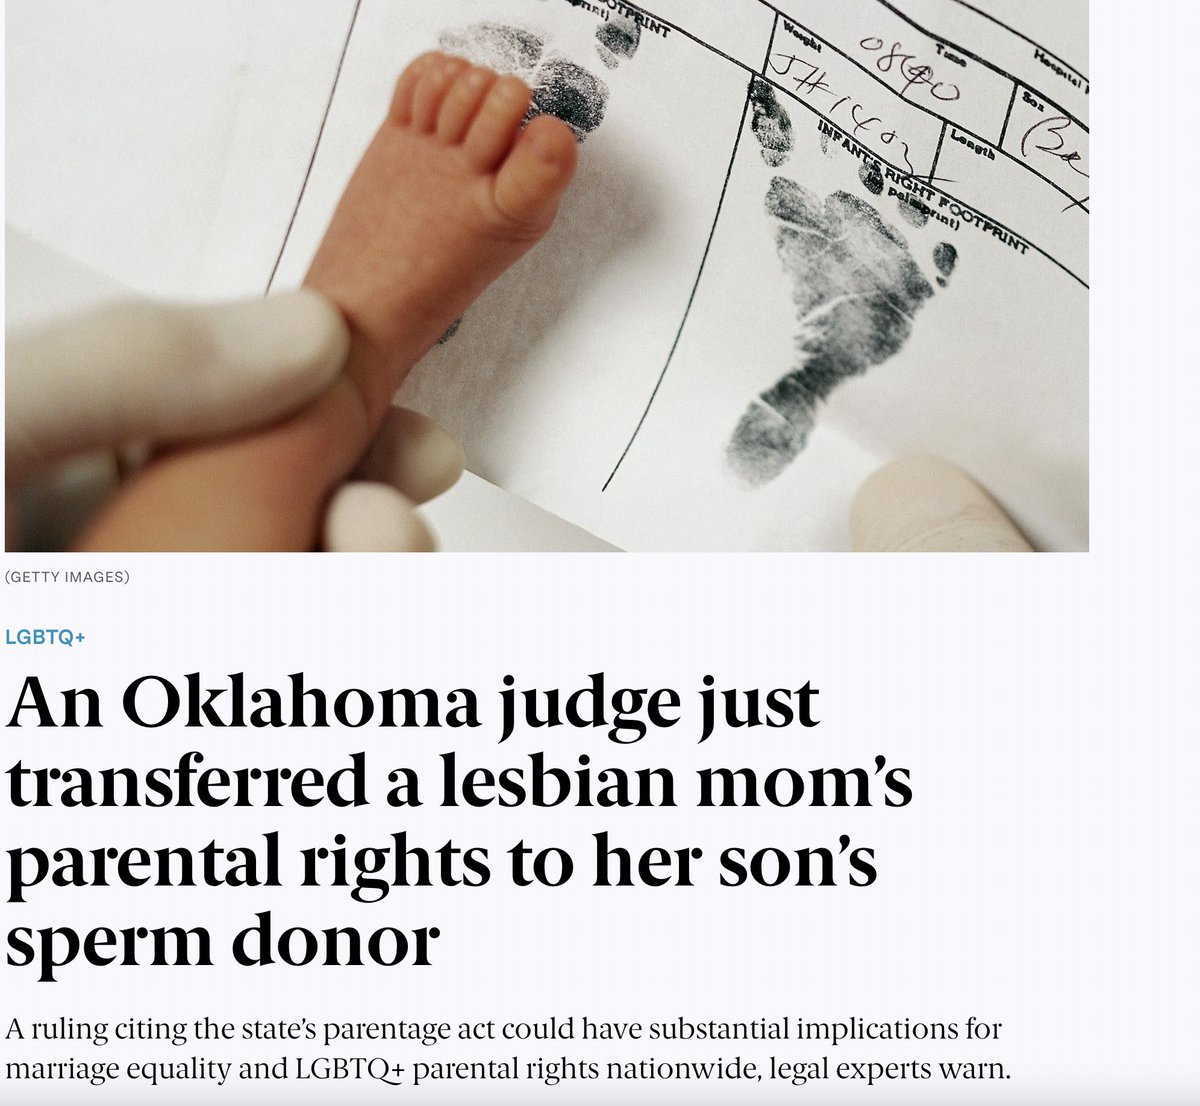 We told you this would happen. They're going after Obergefell, gay marriage, and gay parents in Oklahoma. You didn't think this would stop at trans people, did you?